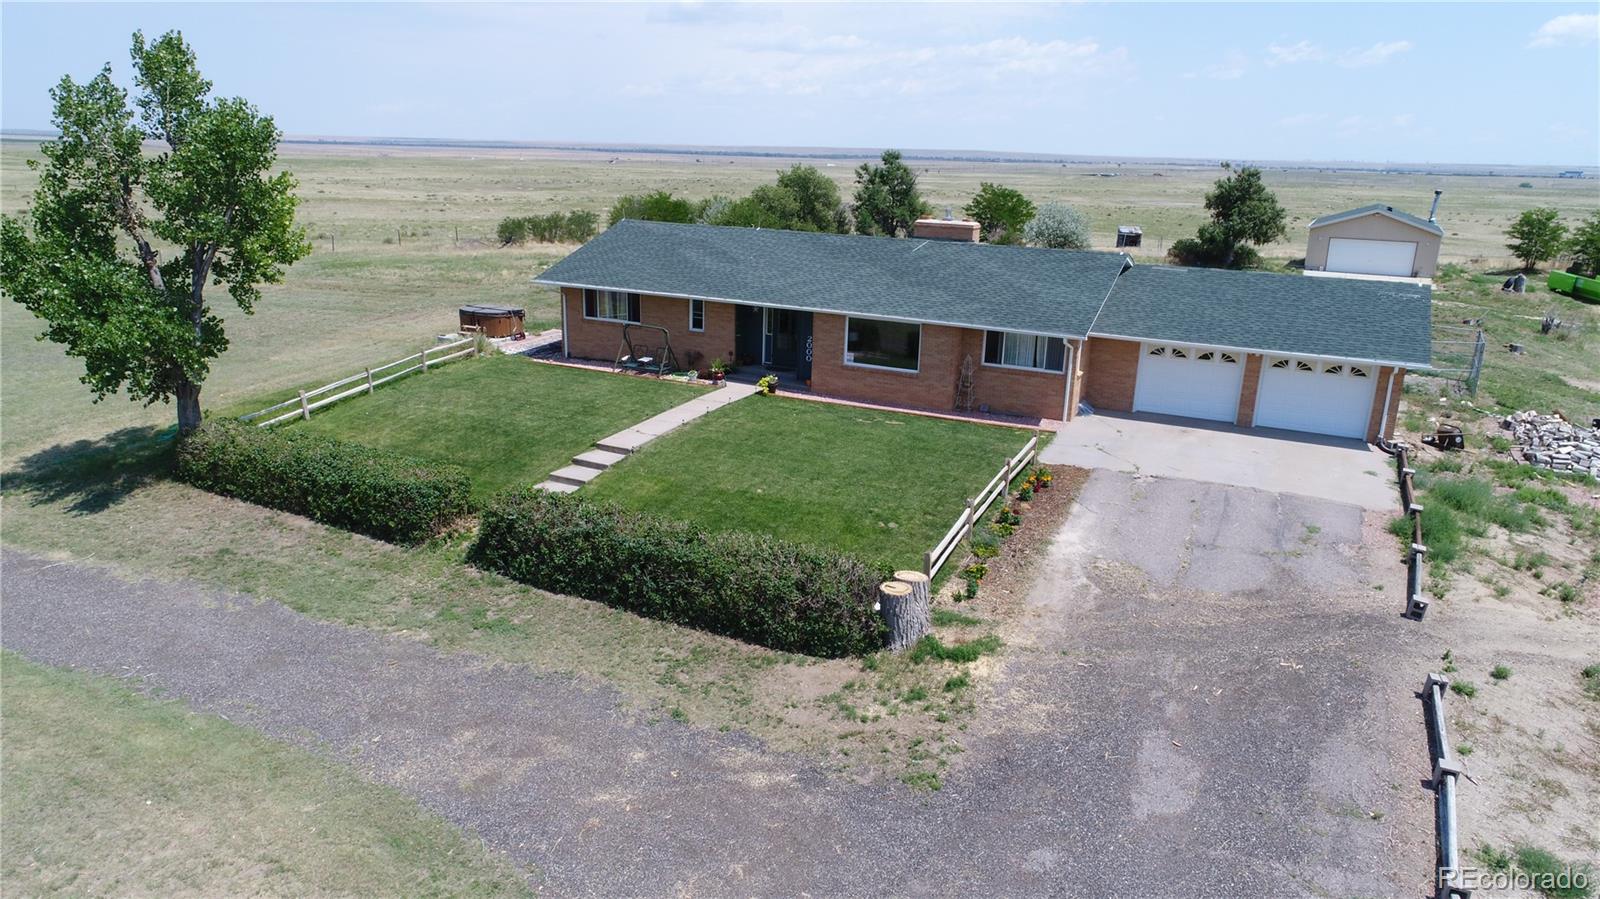 2000 S County Road 193 - Sellers Agent - SOLD $489,900